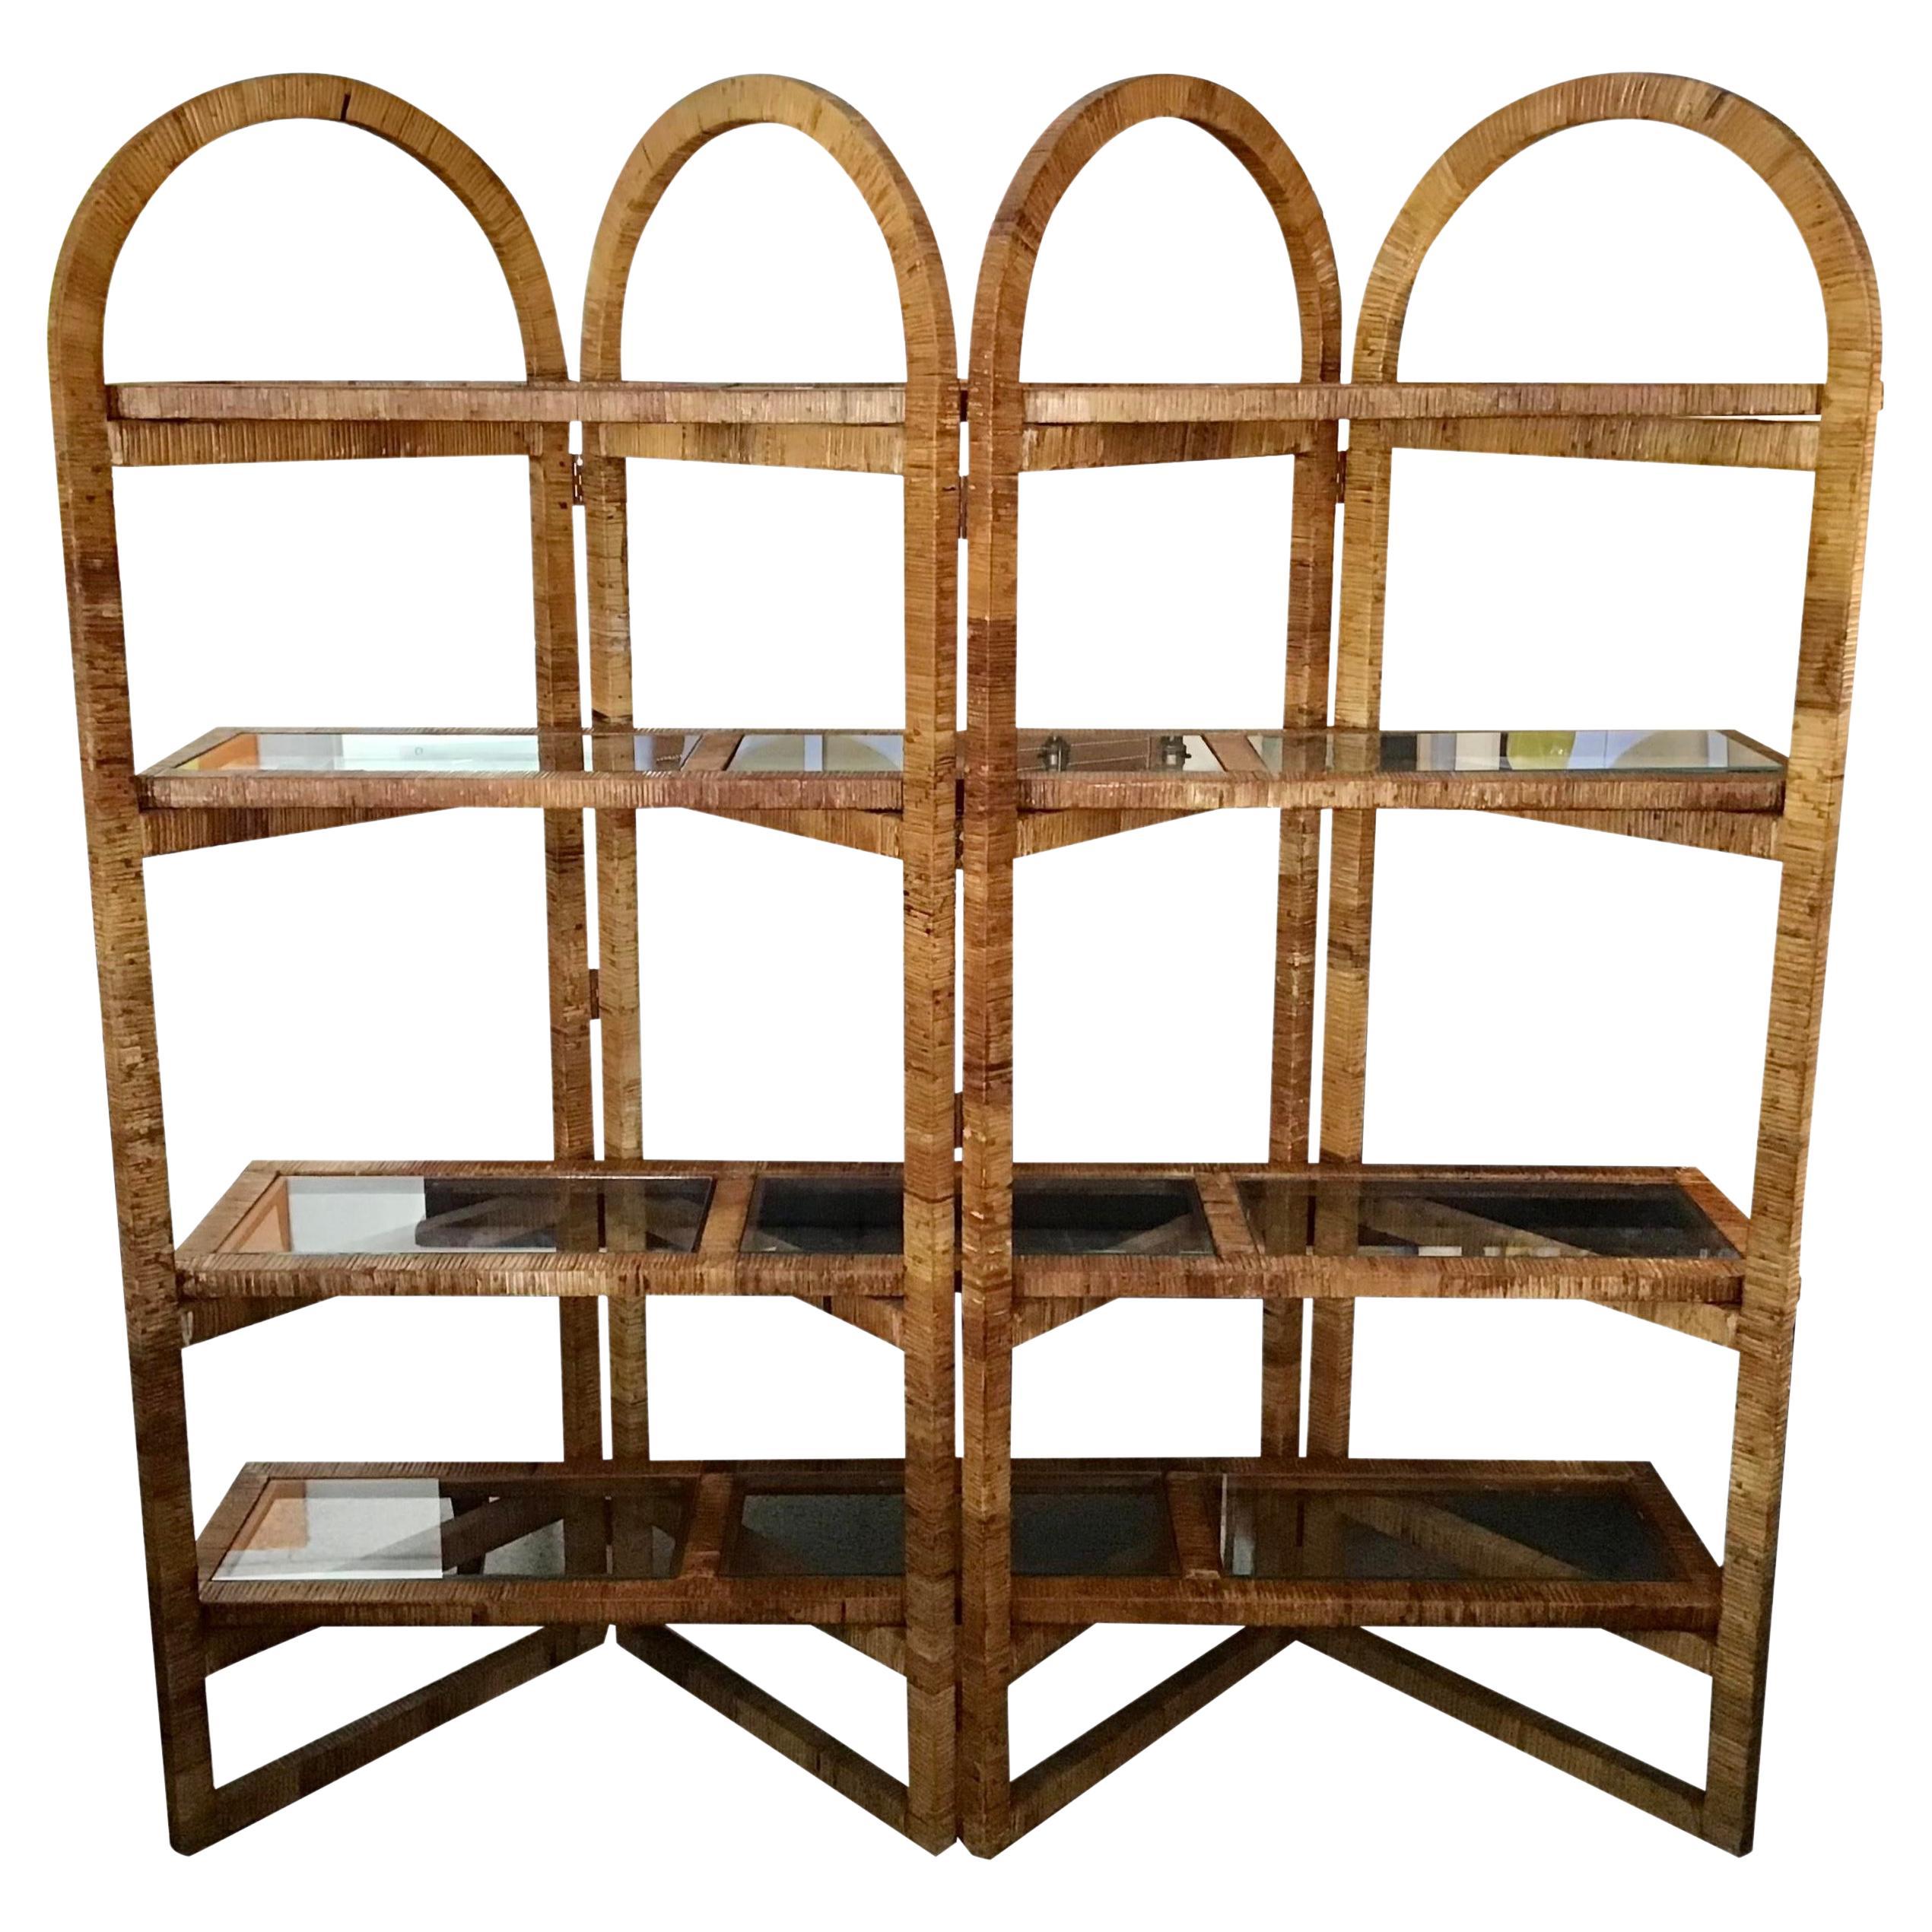 Bielecky Brothers Rattan Arch Top Etagere